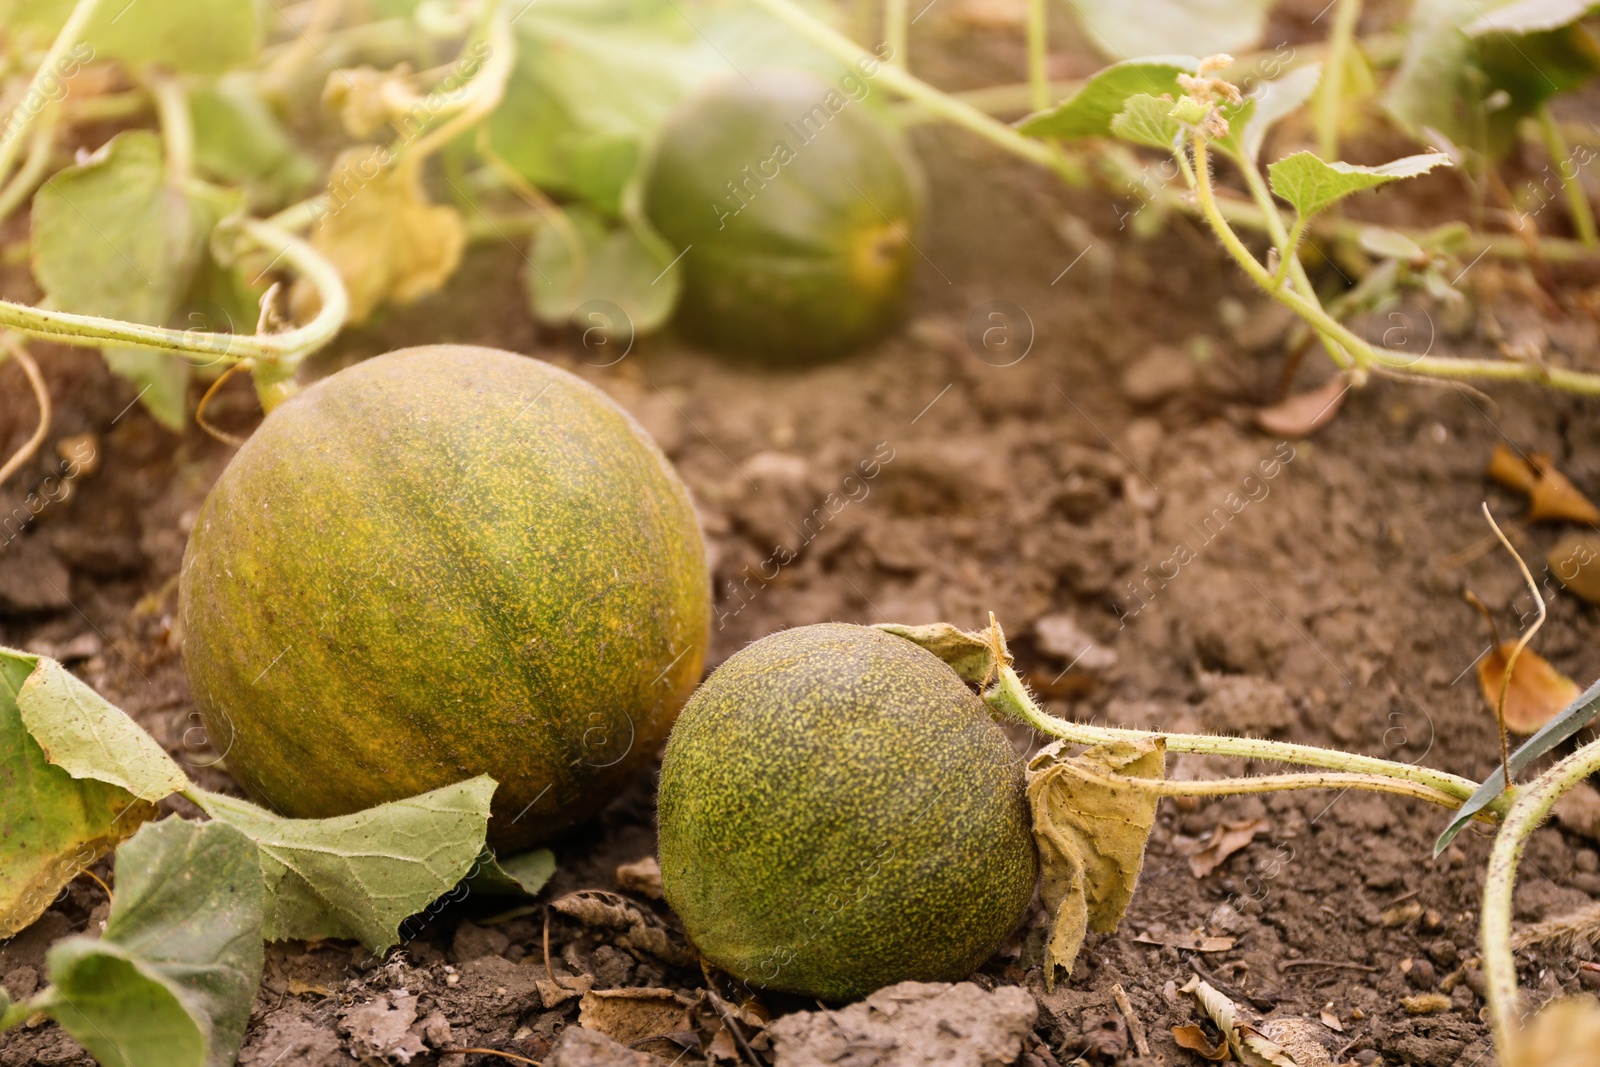 Photo of Fresh juicy melons growing in field on sunny day